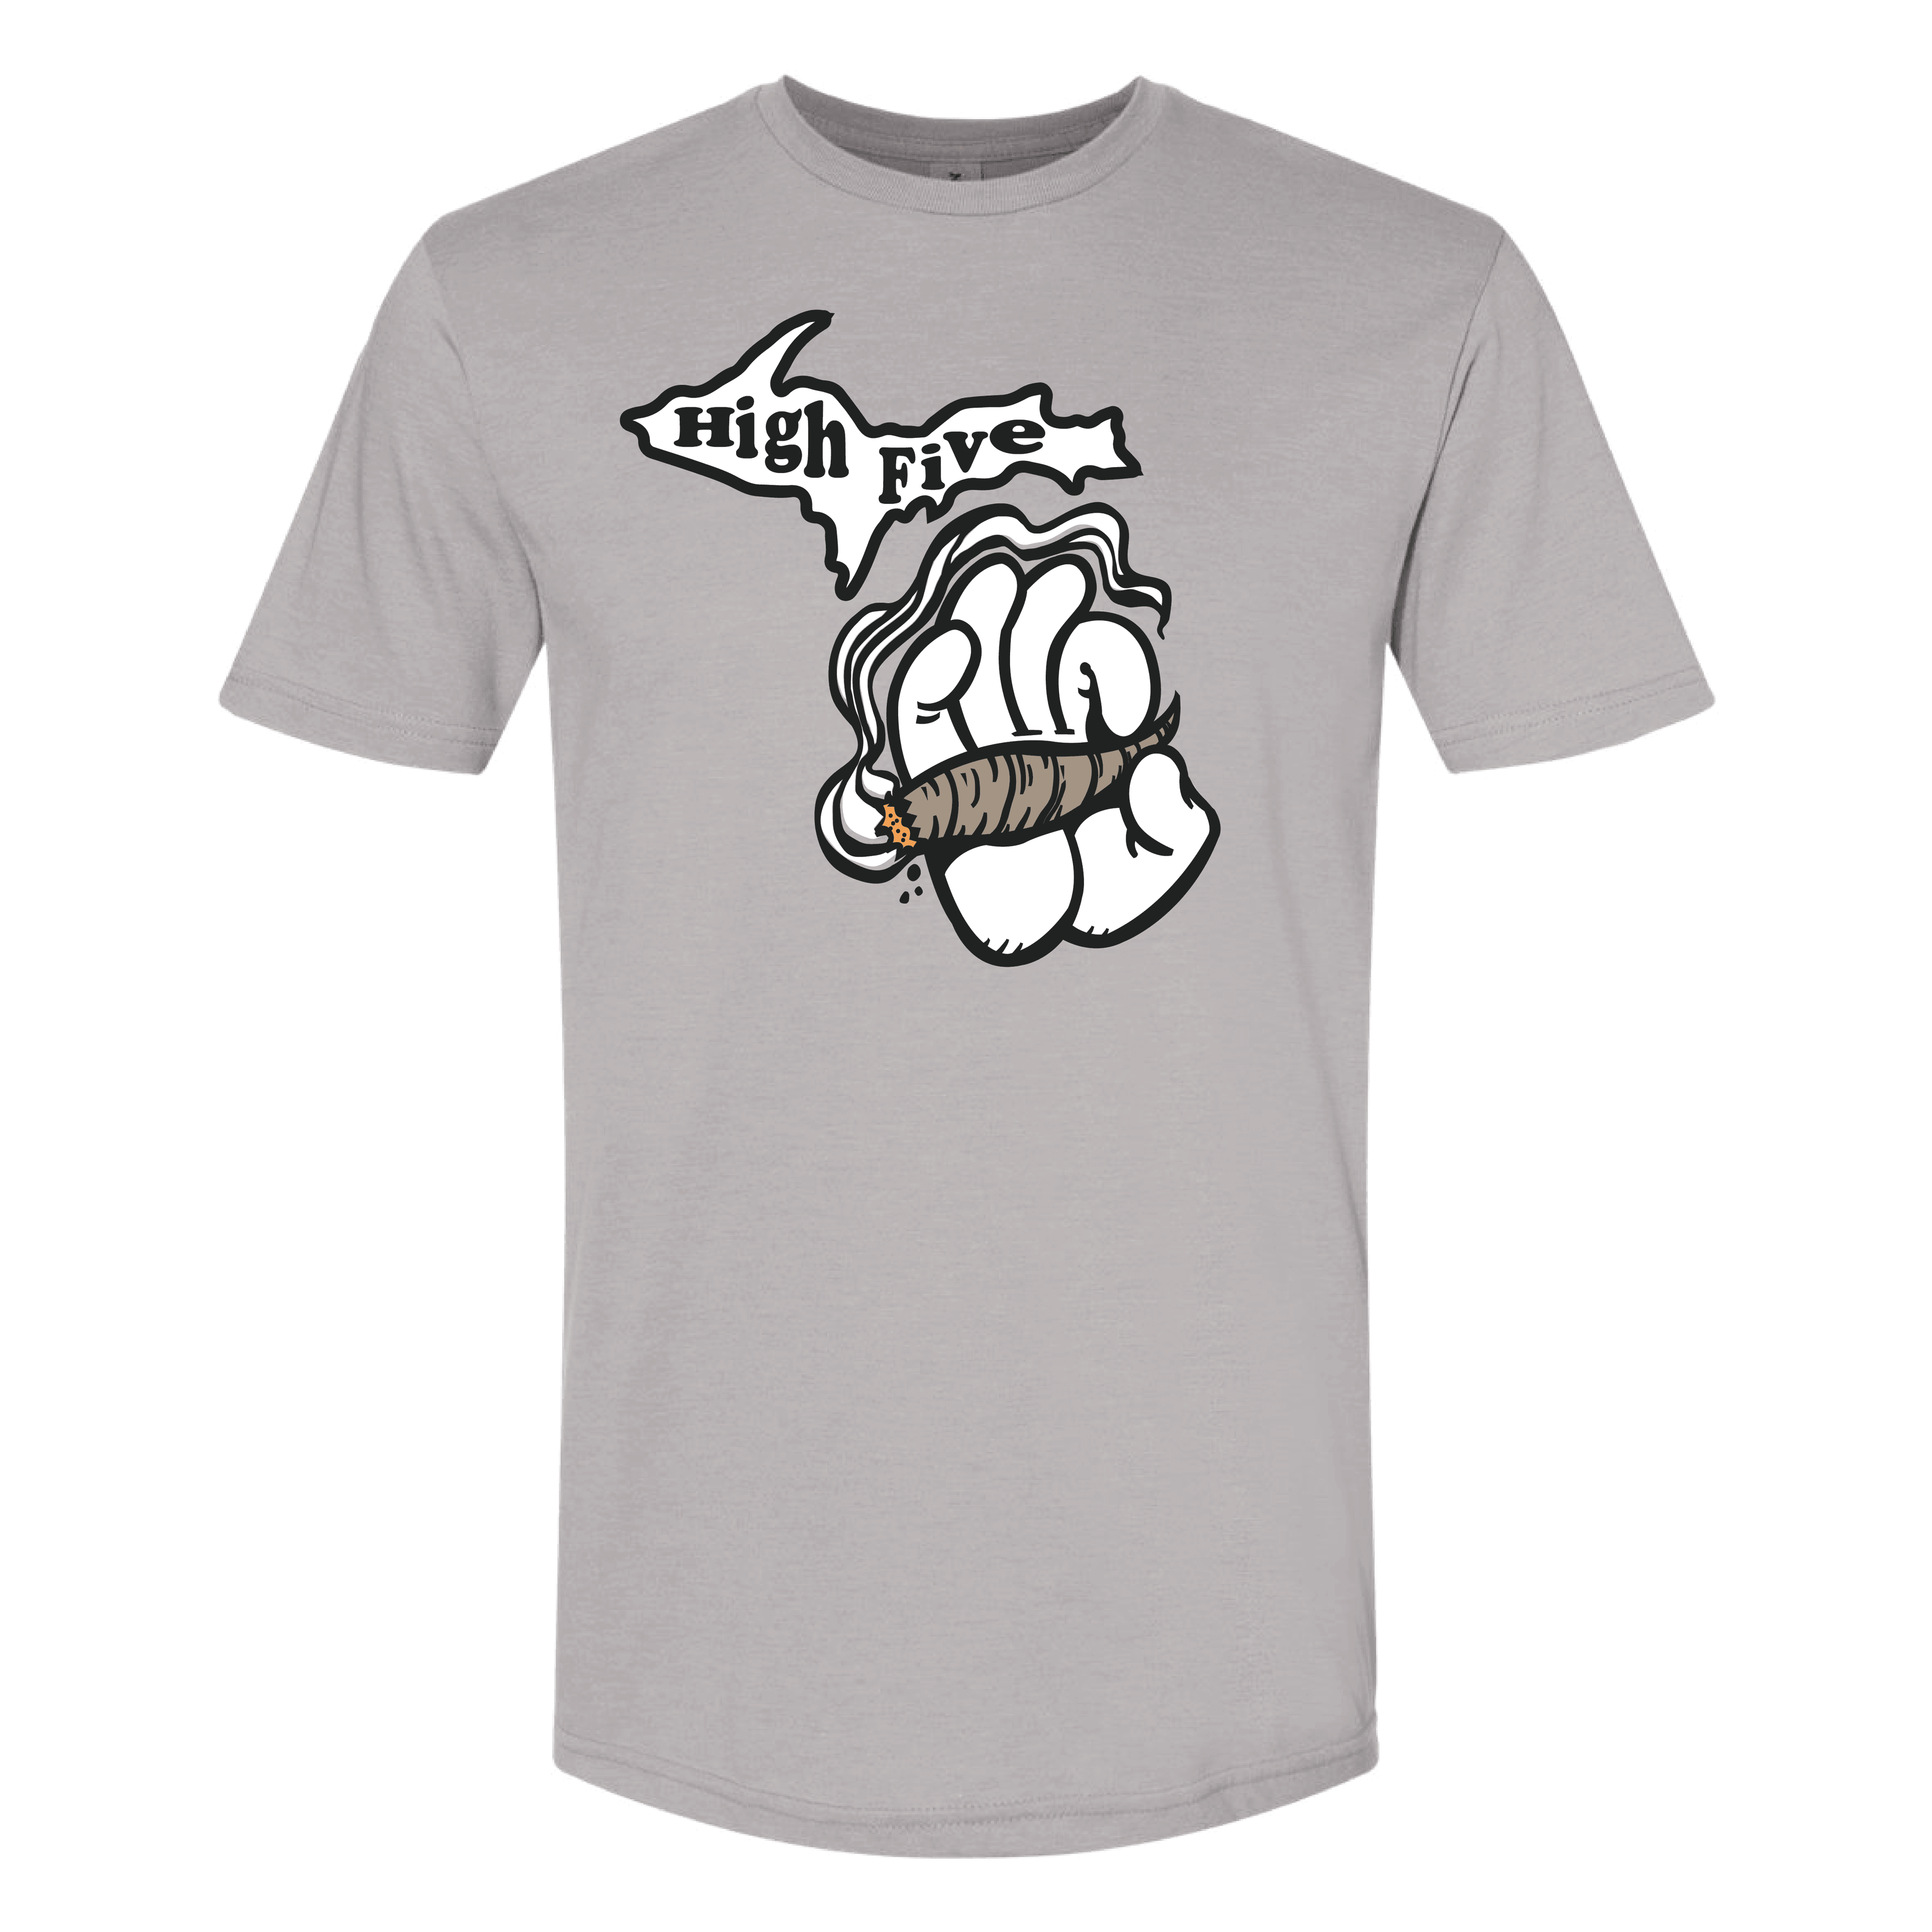 High Five T-Shirt - Ales to Trails